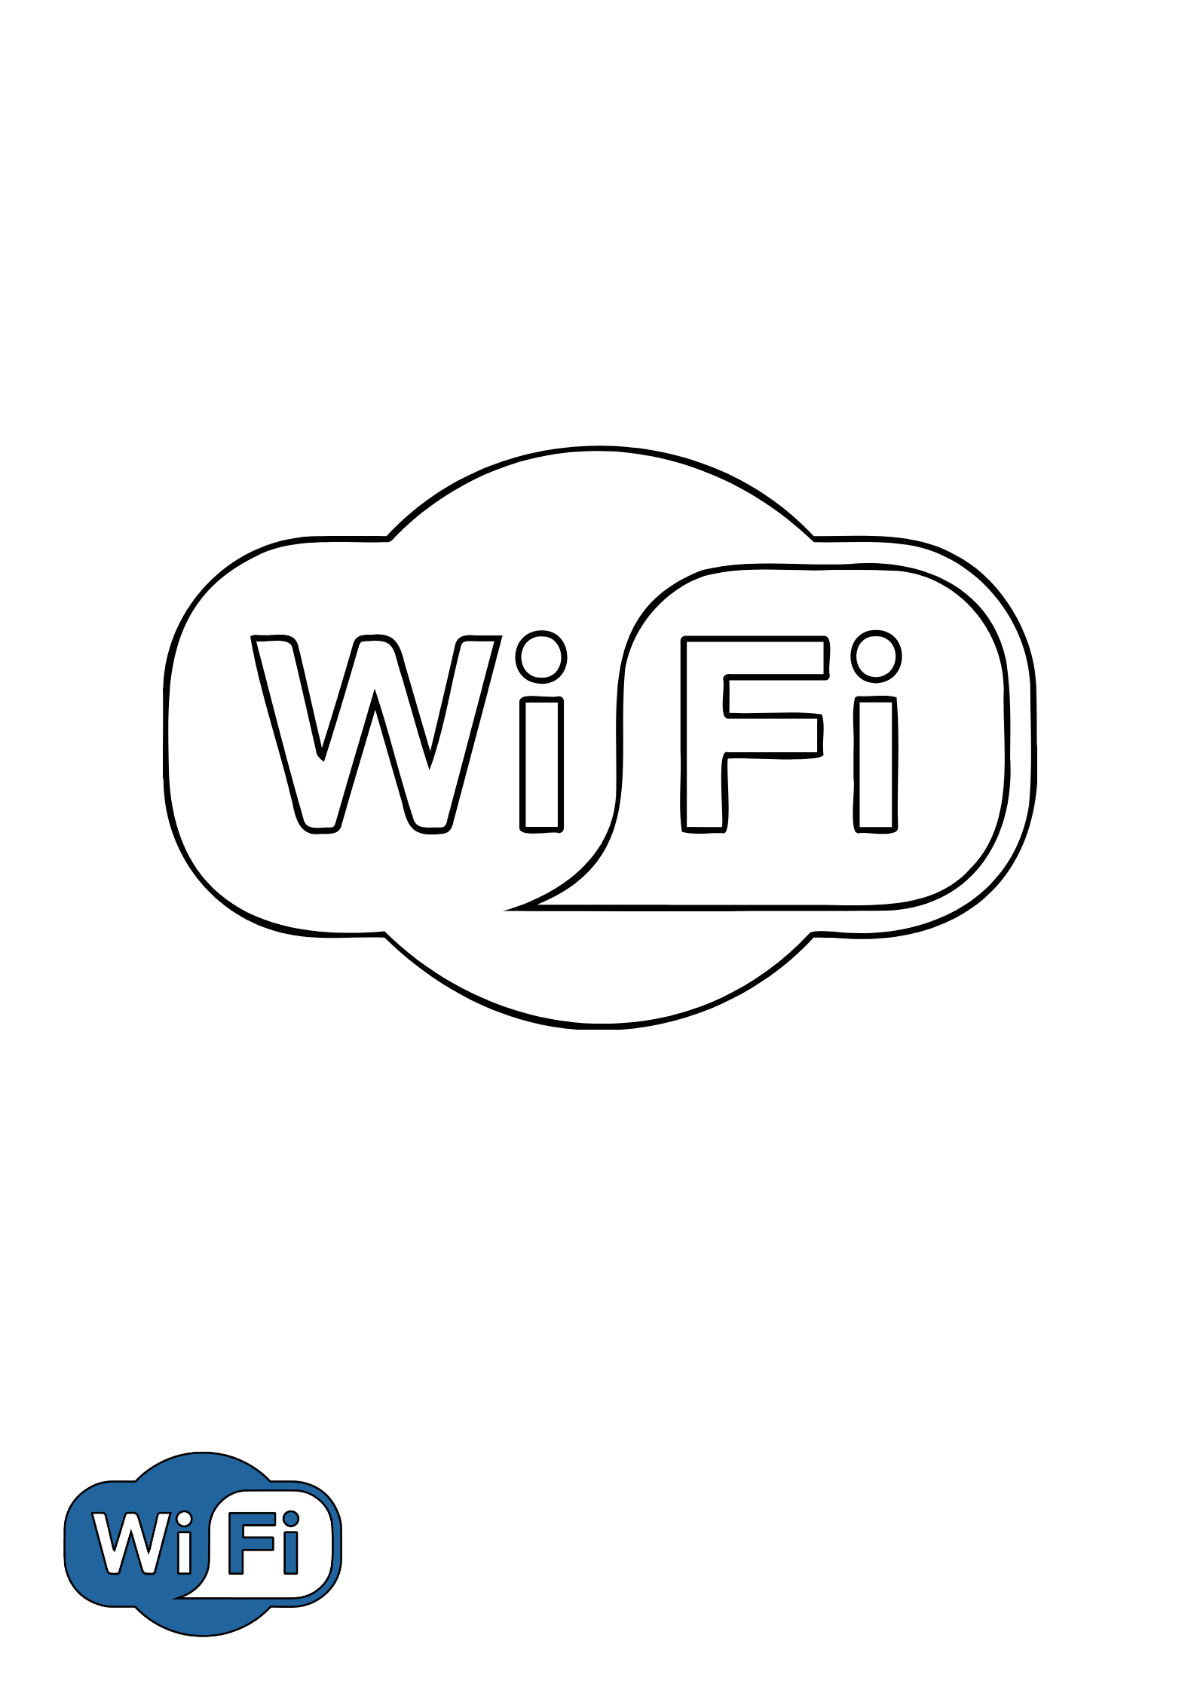 WiFi Logo Coloring Page Template